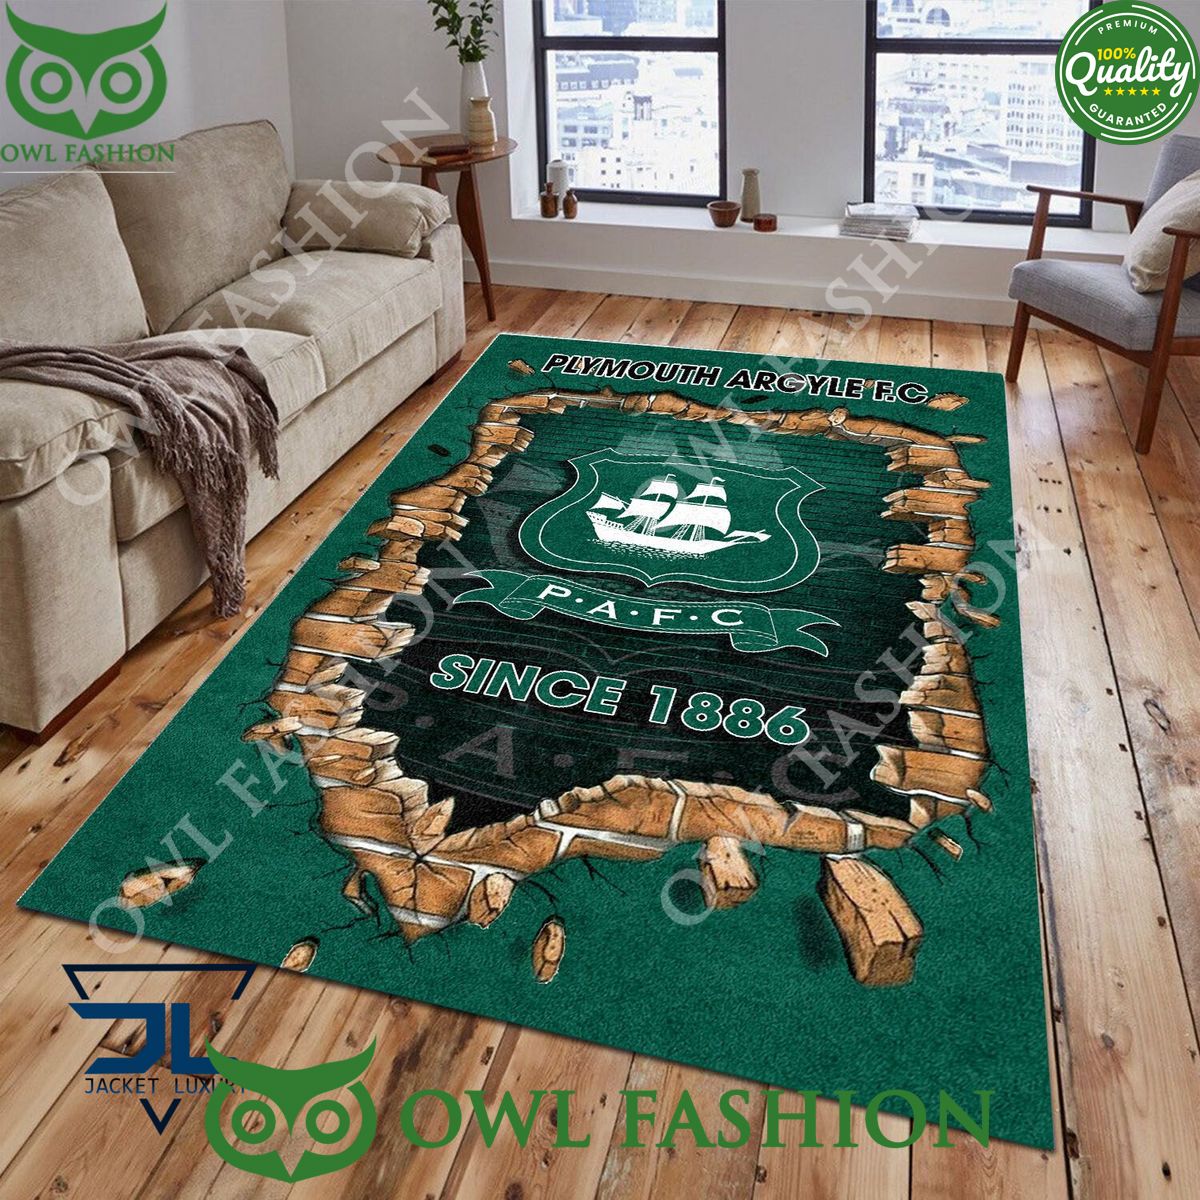 Football Plymouth Argyle F.C 1807 EPL Living Room Rug Carpet Out of the world